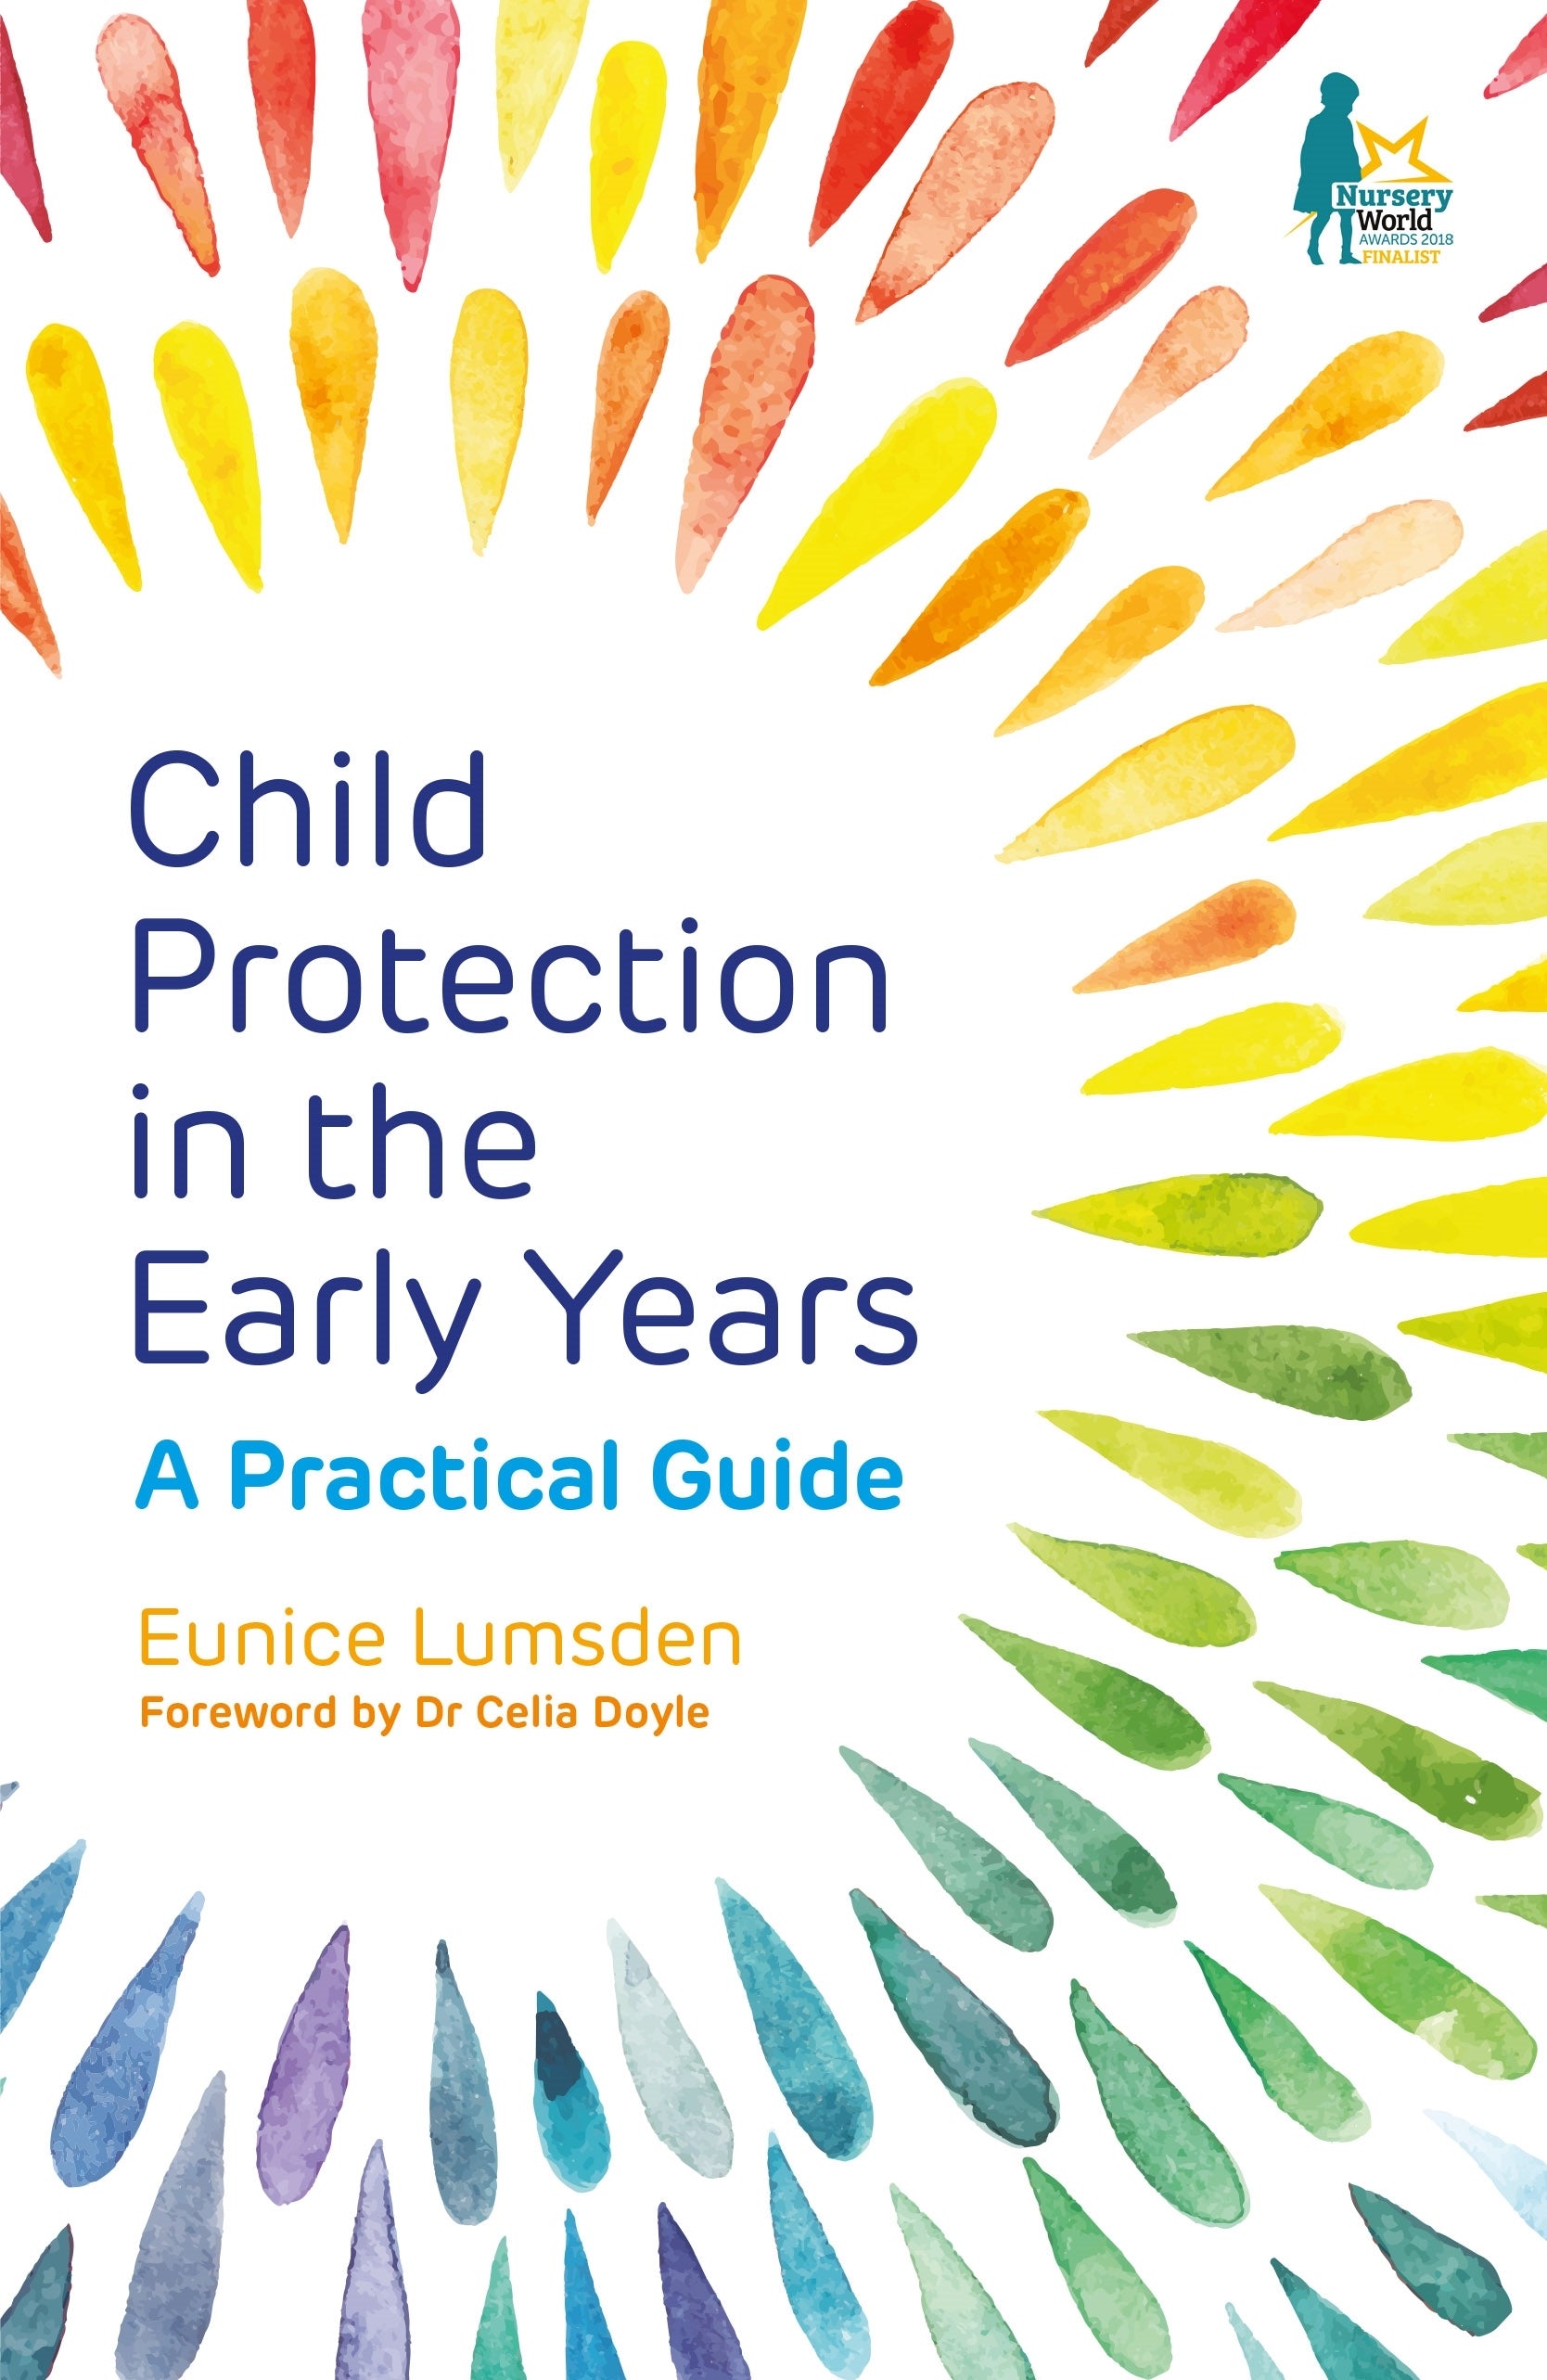 Child Protection in the Early Years by Eunice Lumsden, Dr Celia Doyle